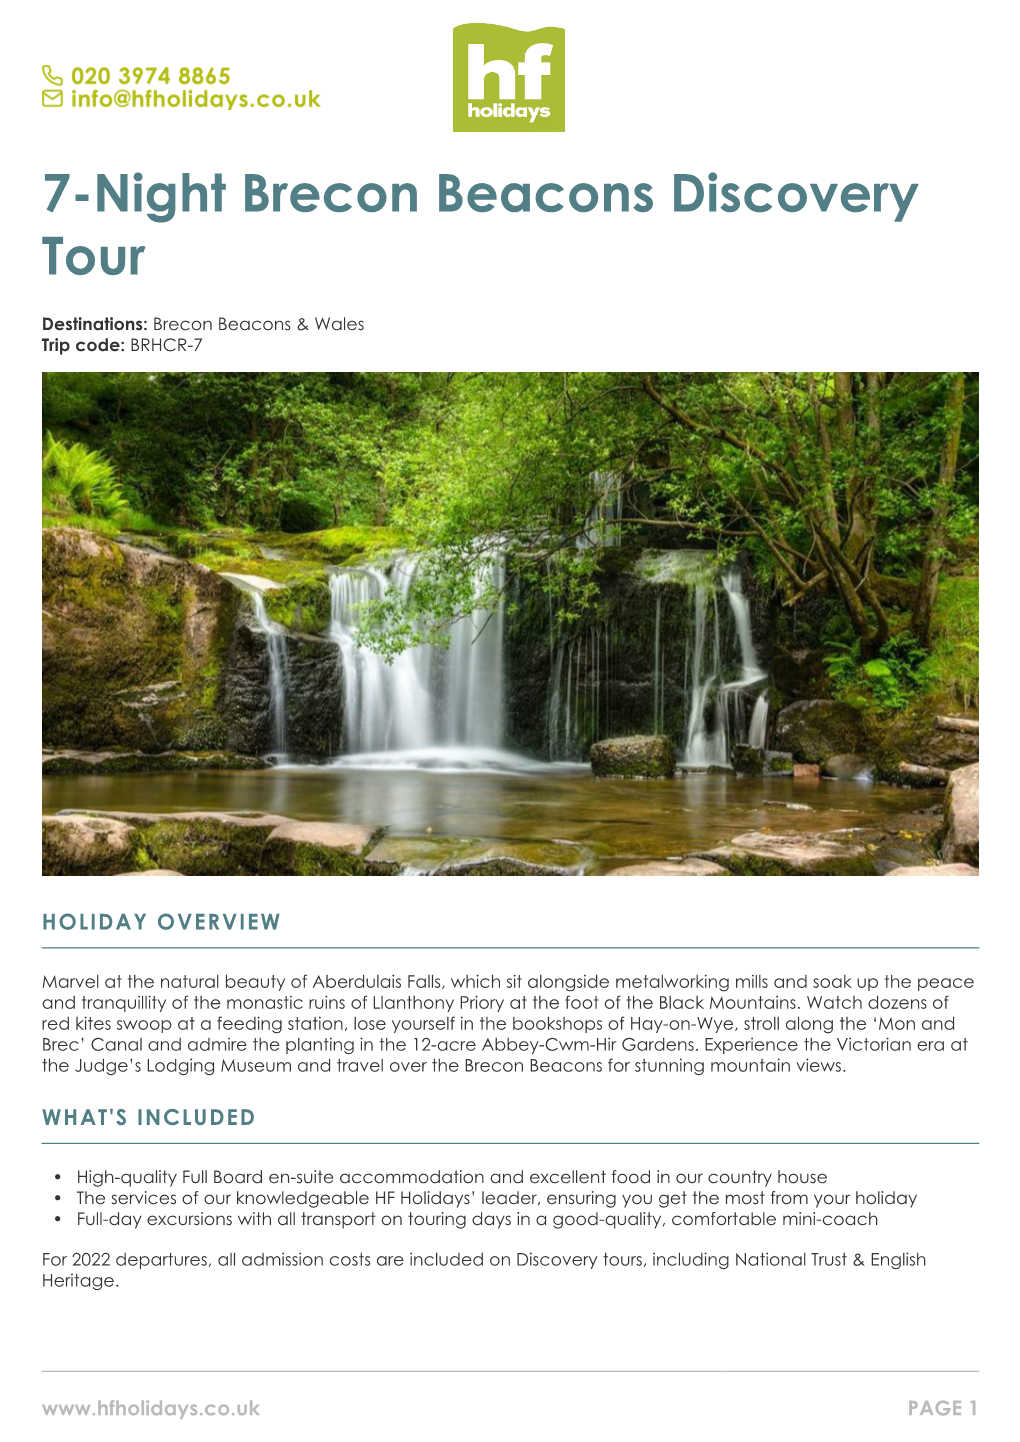 7-Night Brecon Beacons Discovery Tour